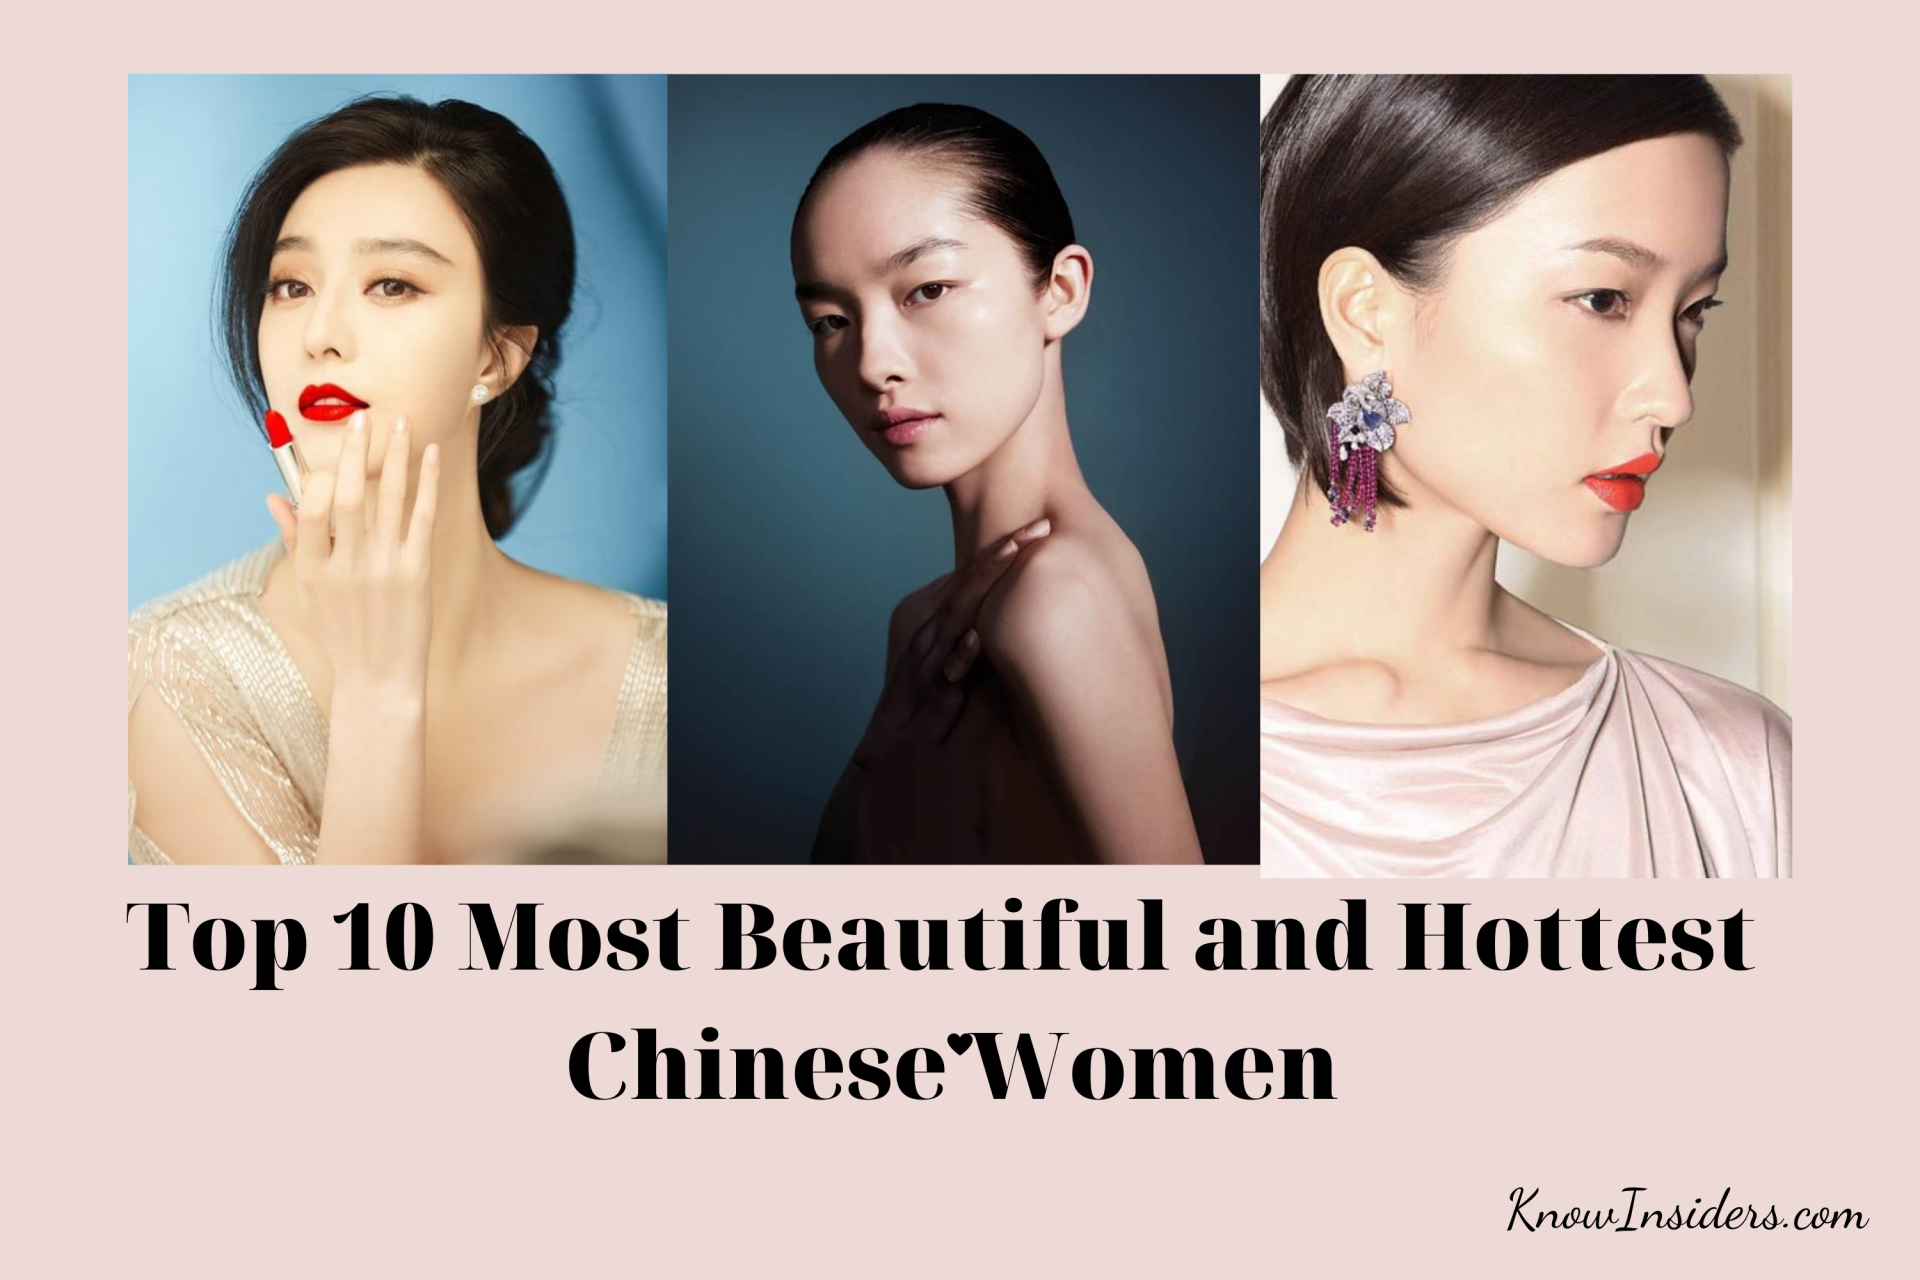 Top 10 Most Beautiful Chinese Women - Updated